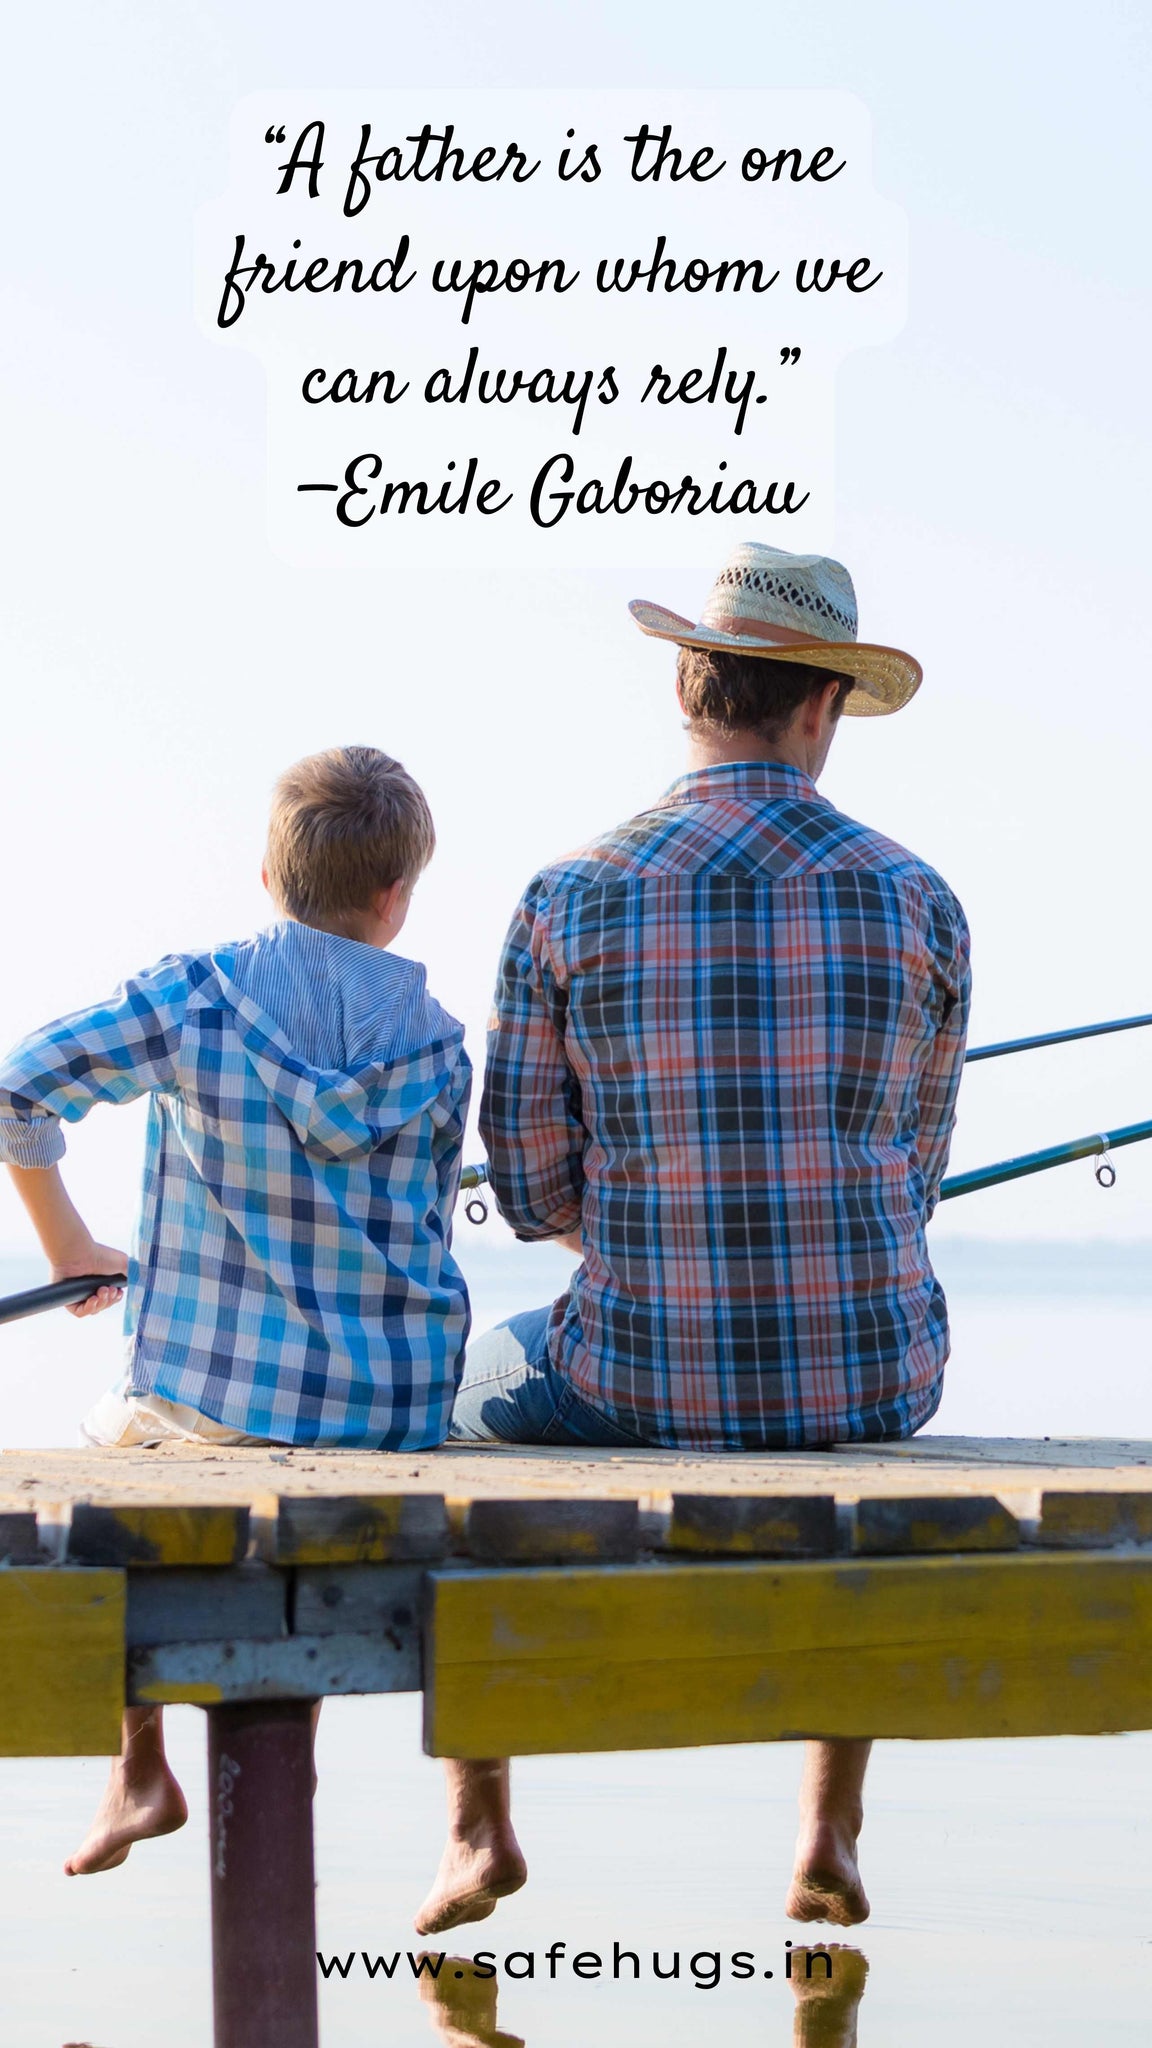 Quote: 'A father is the one friend upon whom we can always rely.' —Emile Gaboriau